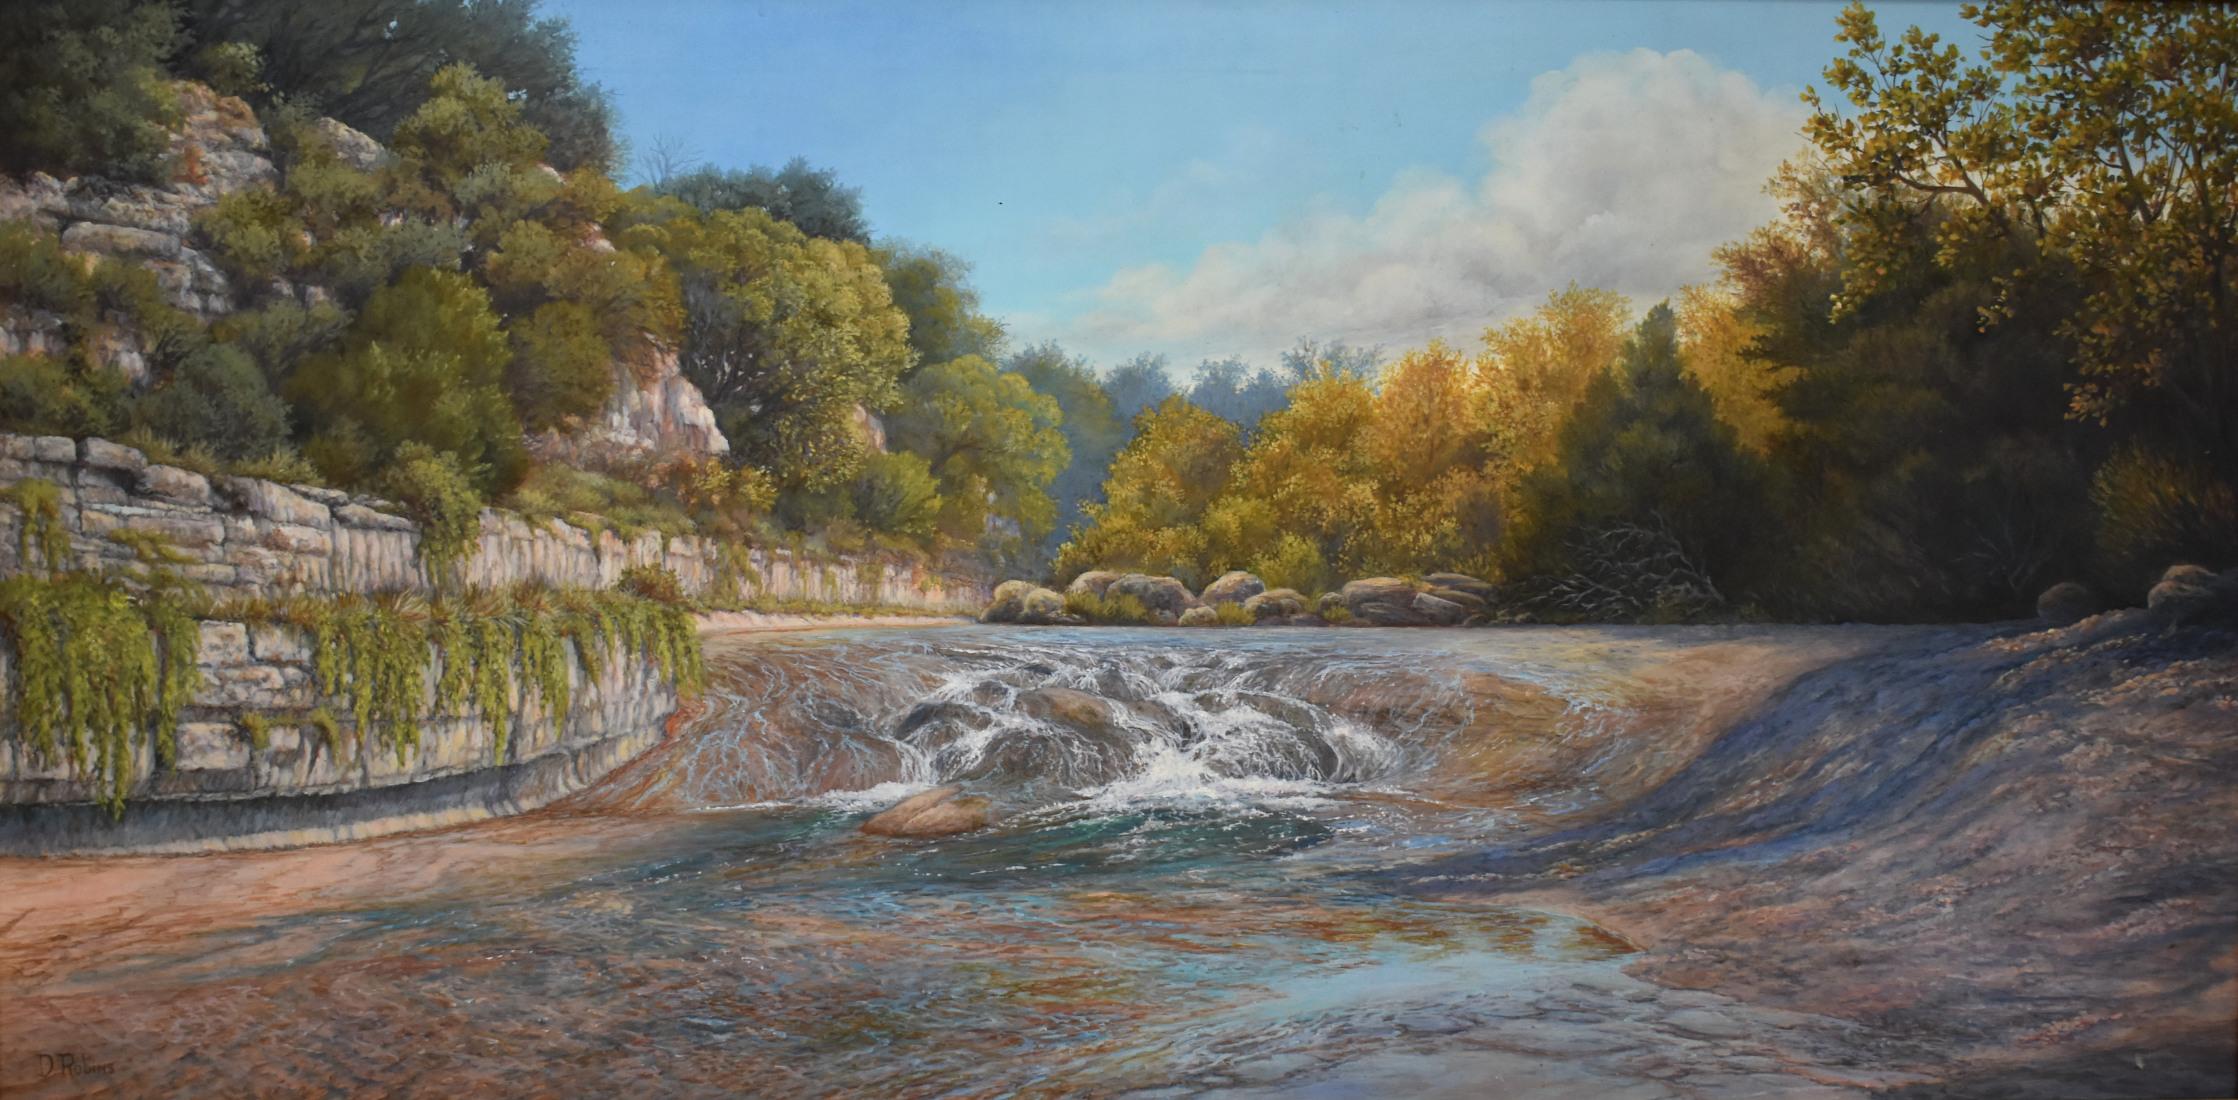 D. Robins Landscape Painting - "Rushing River" Texas Landscape